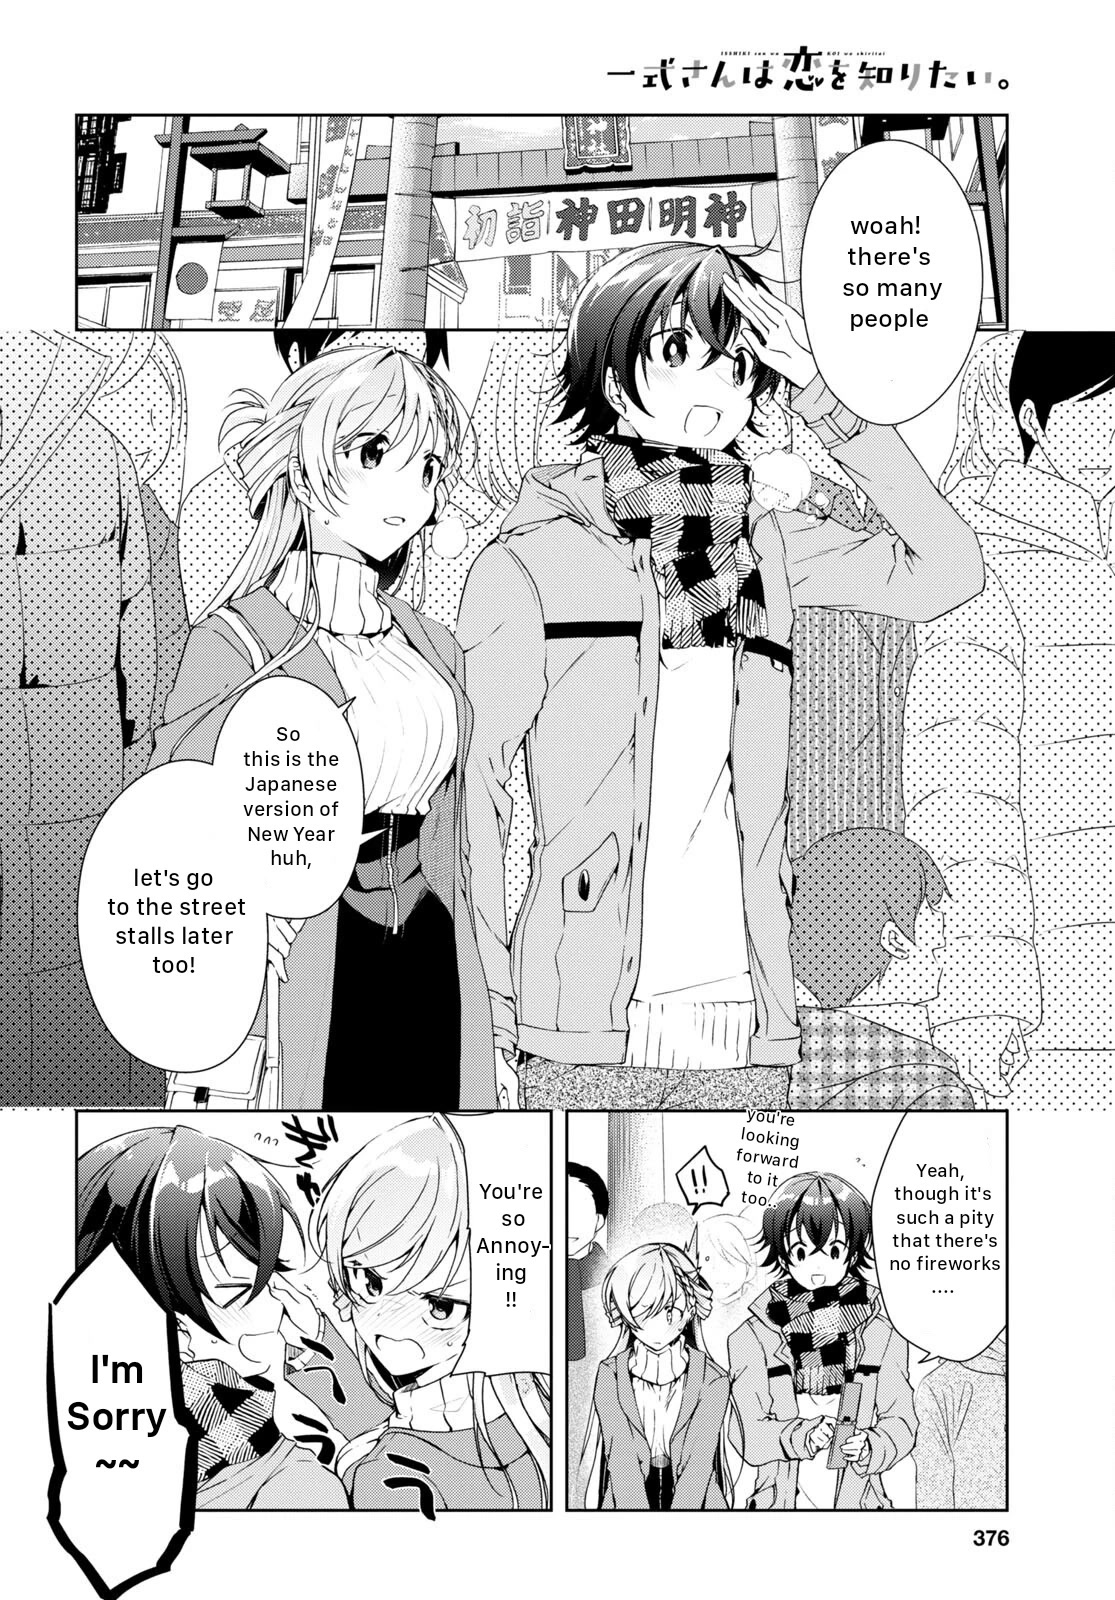 Isshiki-san Wants to Know About Love. - chapter 23 - #4